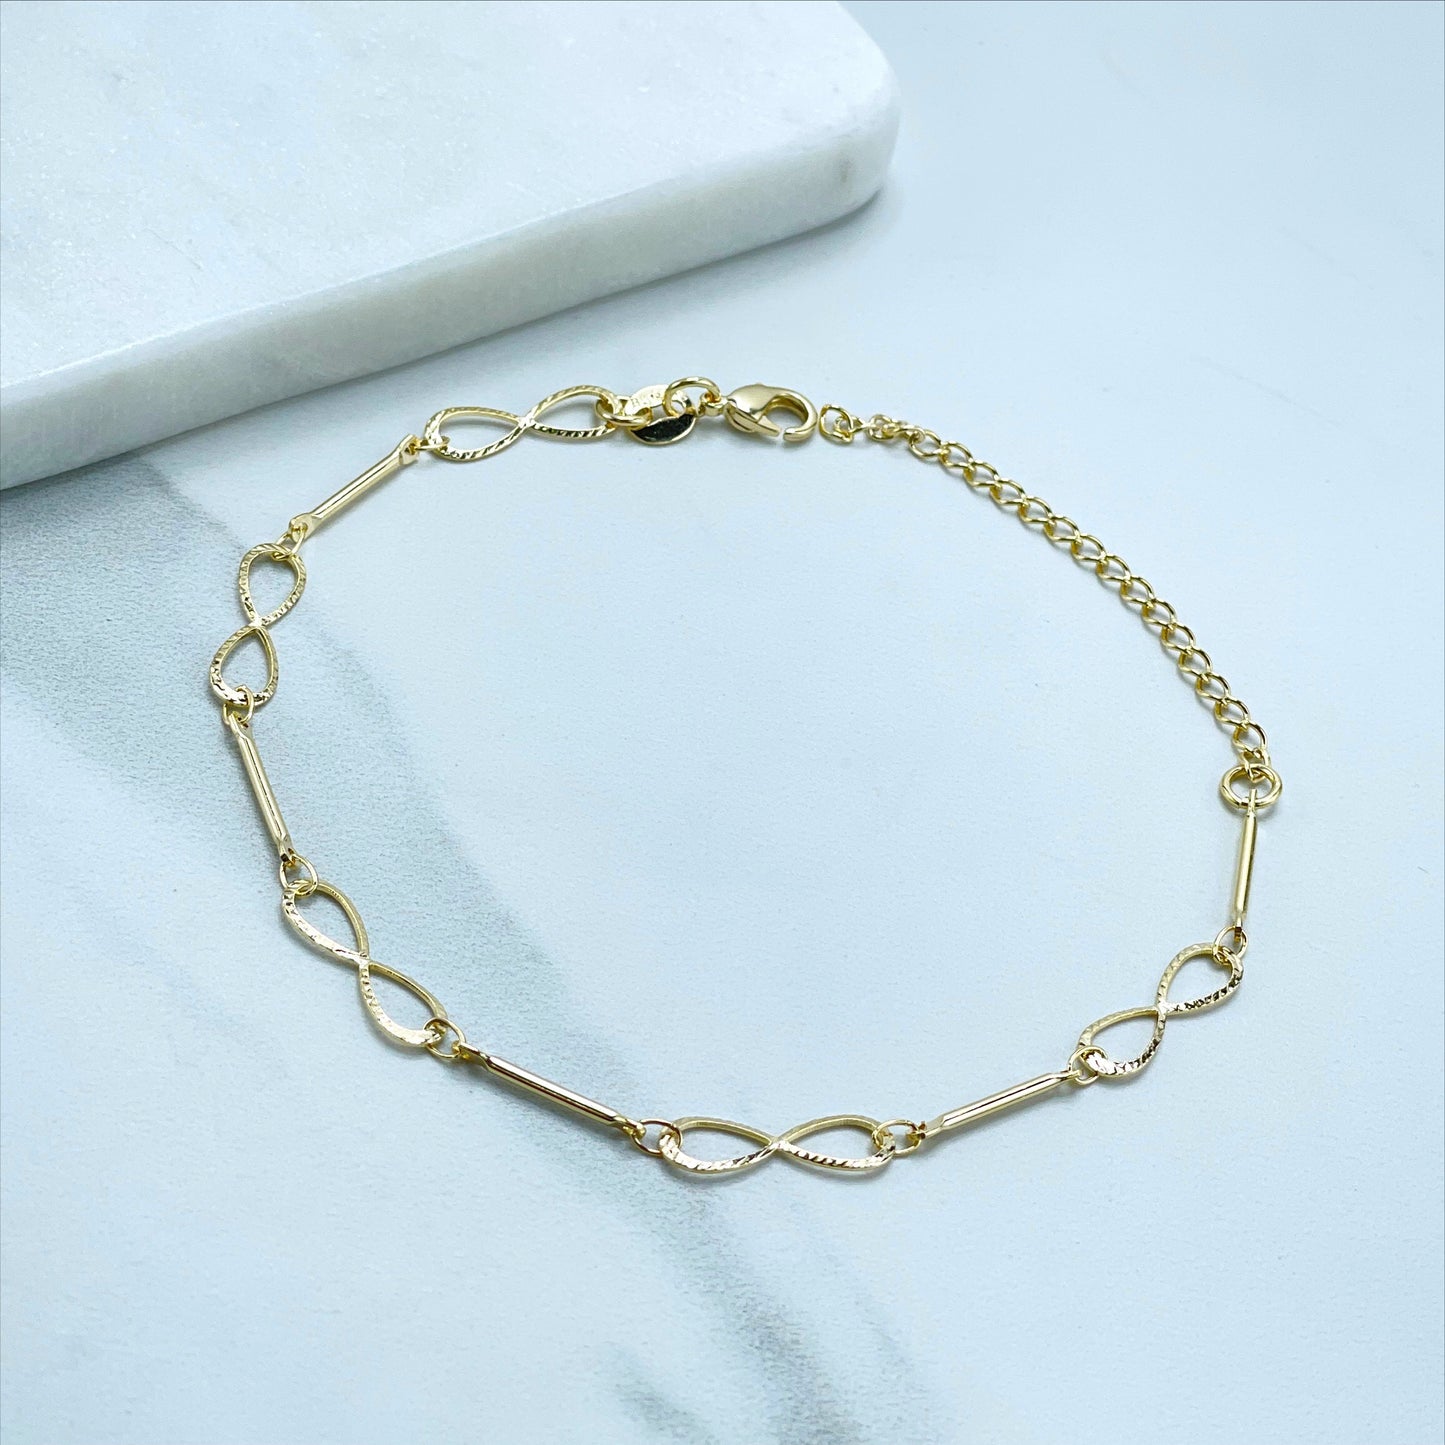 18k Gold Filled 5mm Infinity Sign Necklace or Bracelet or Earrings Set Wholesale Jewelry Supplies